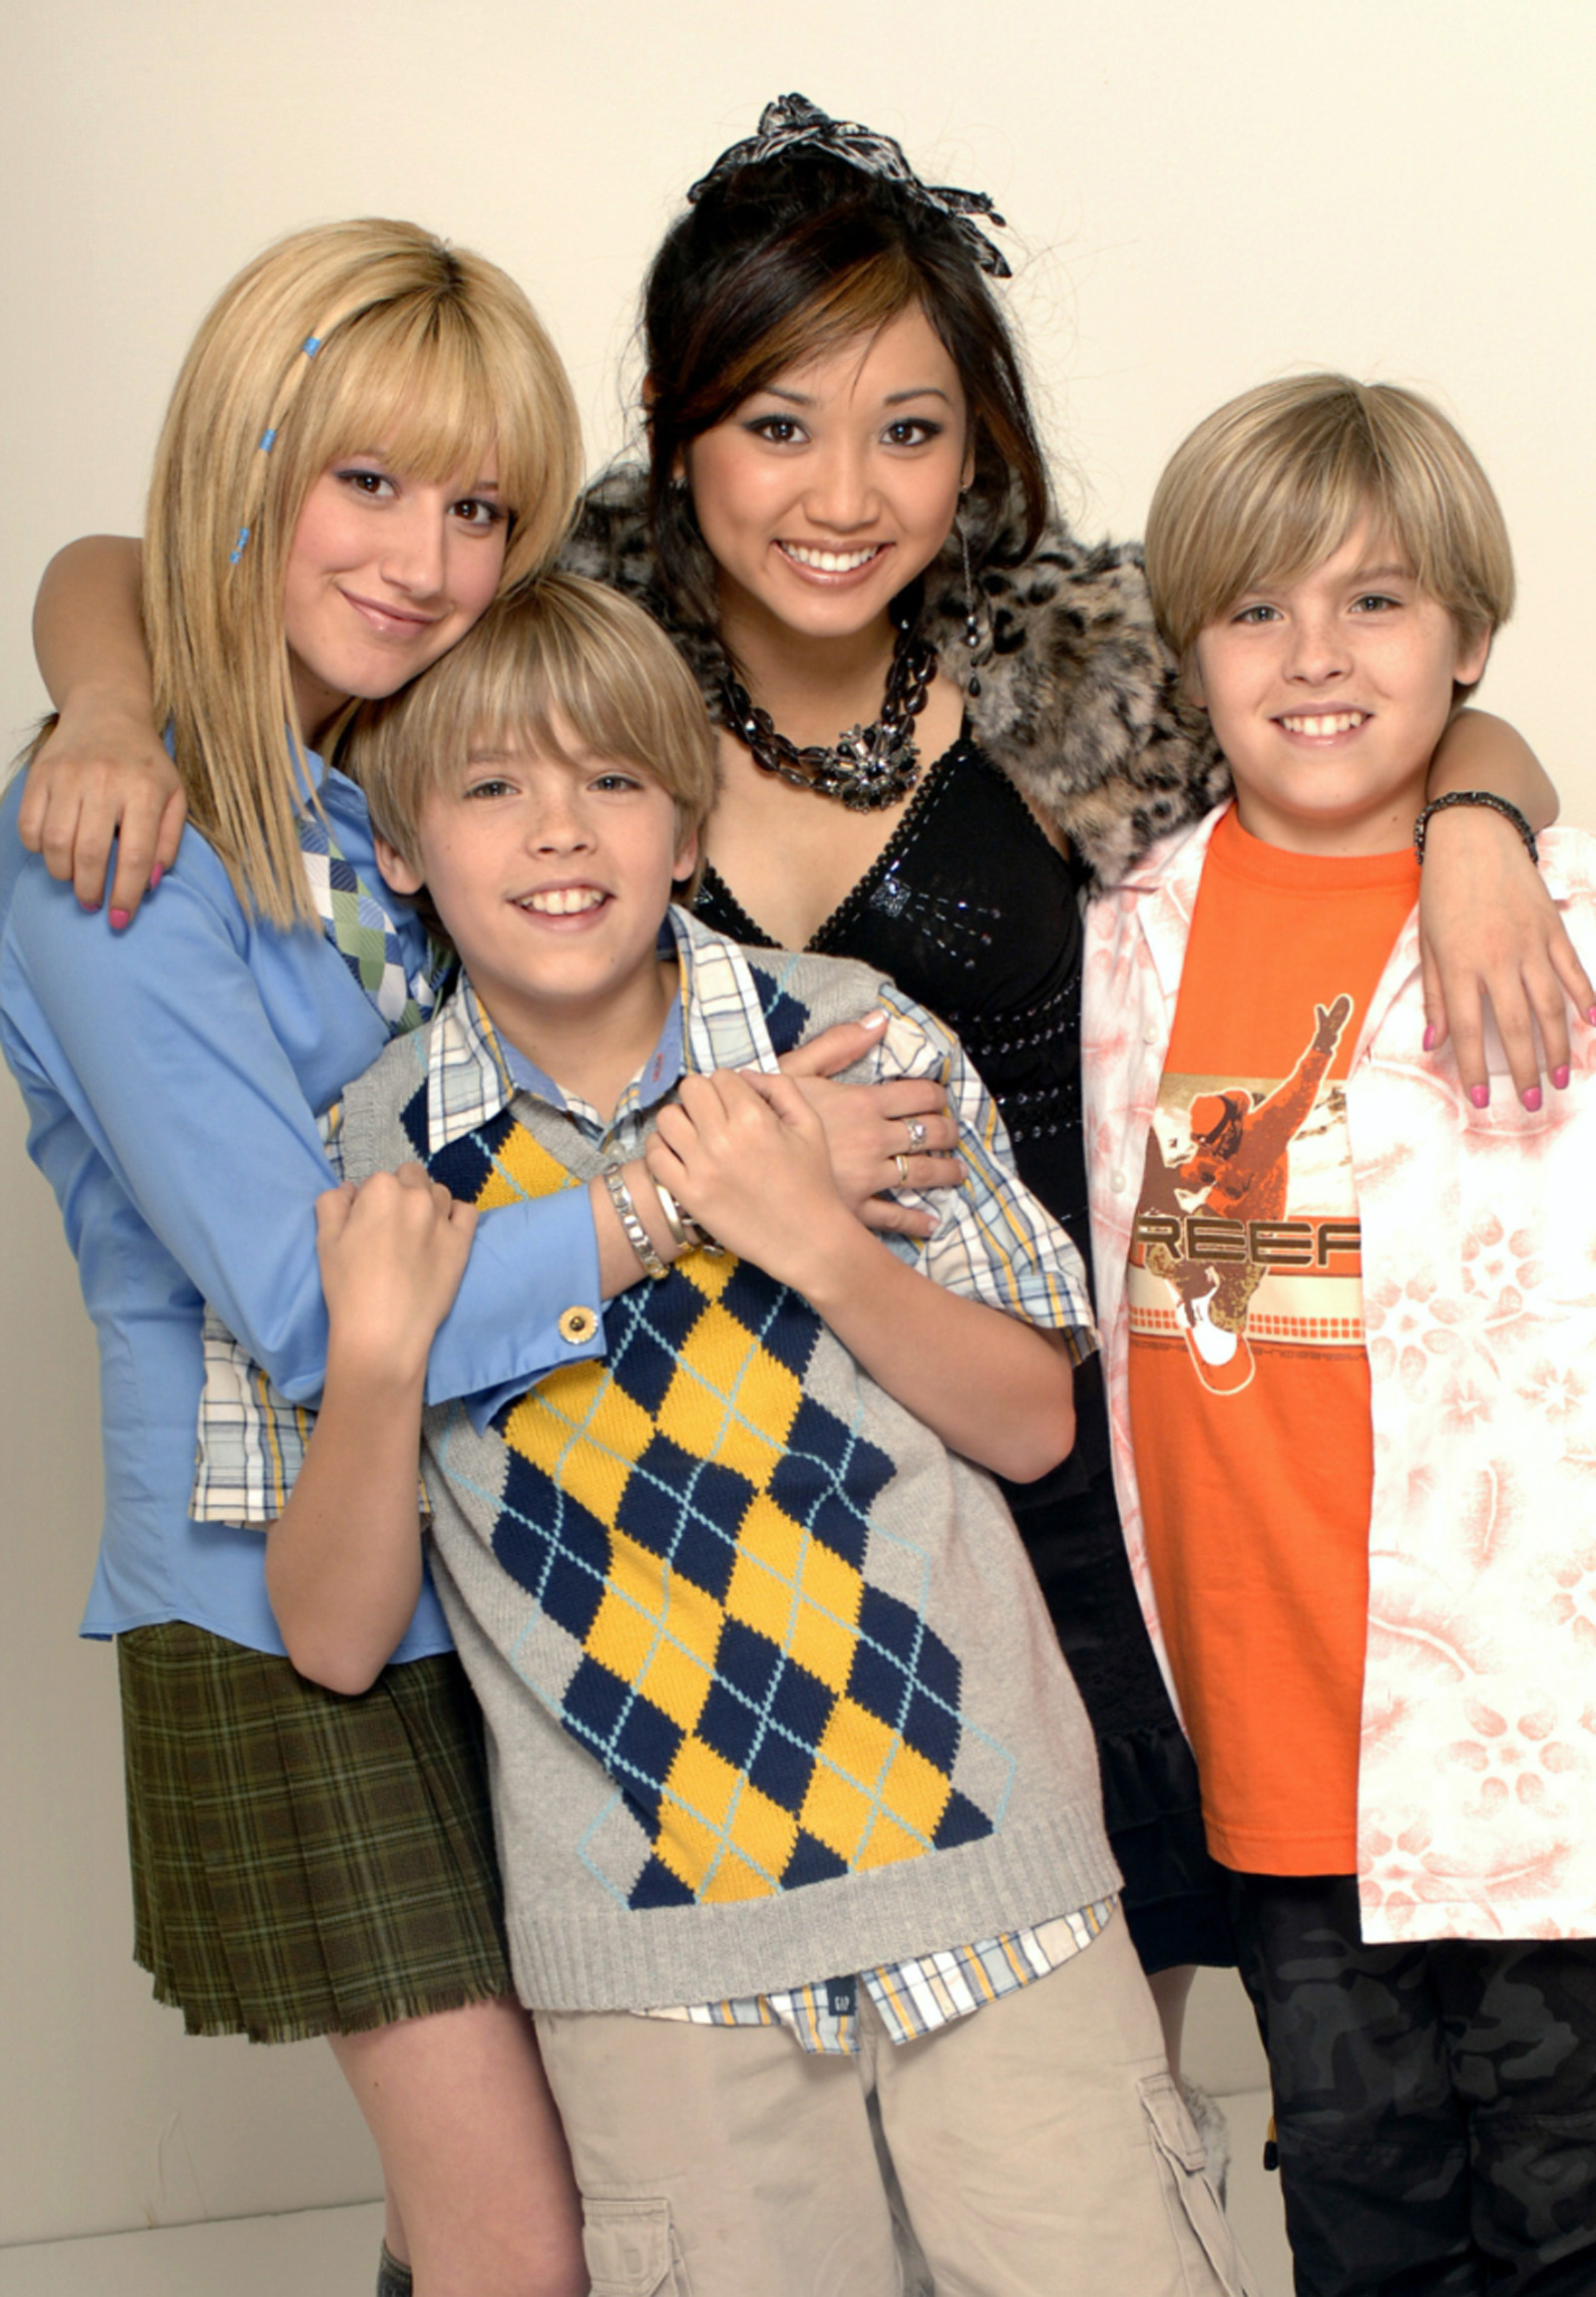 Brenda Song in The Suite Life of Zack and Cody (Season 1)